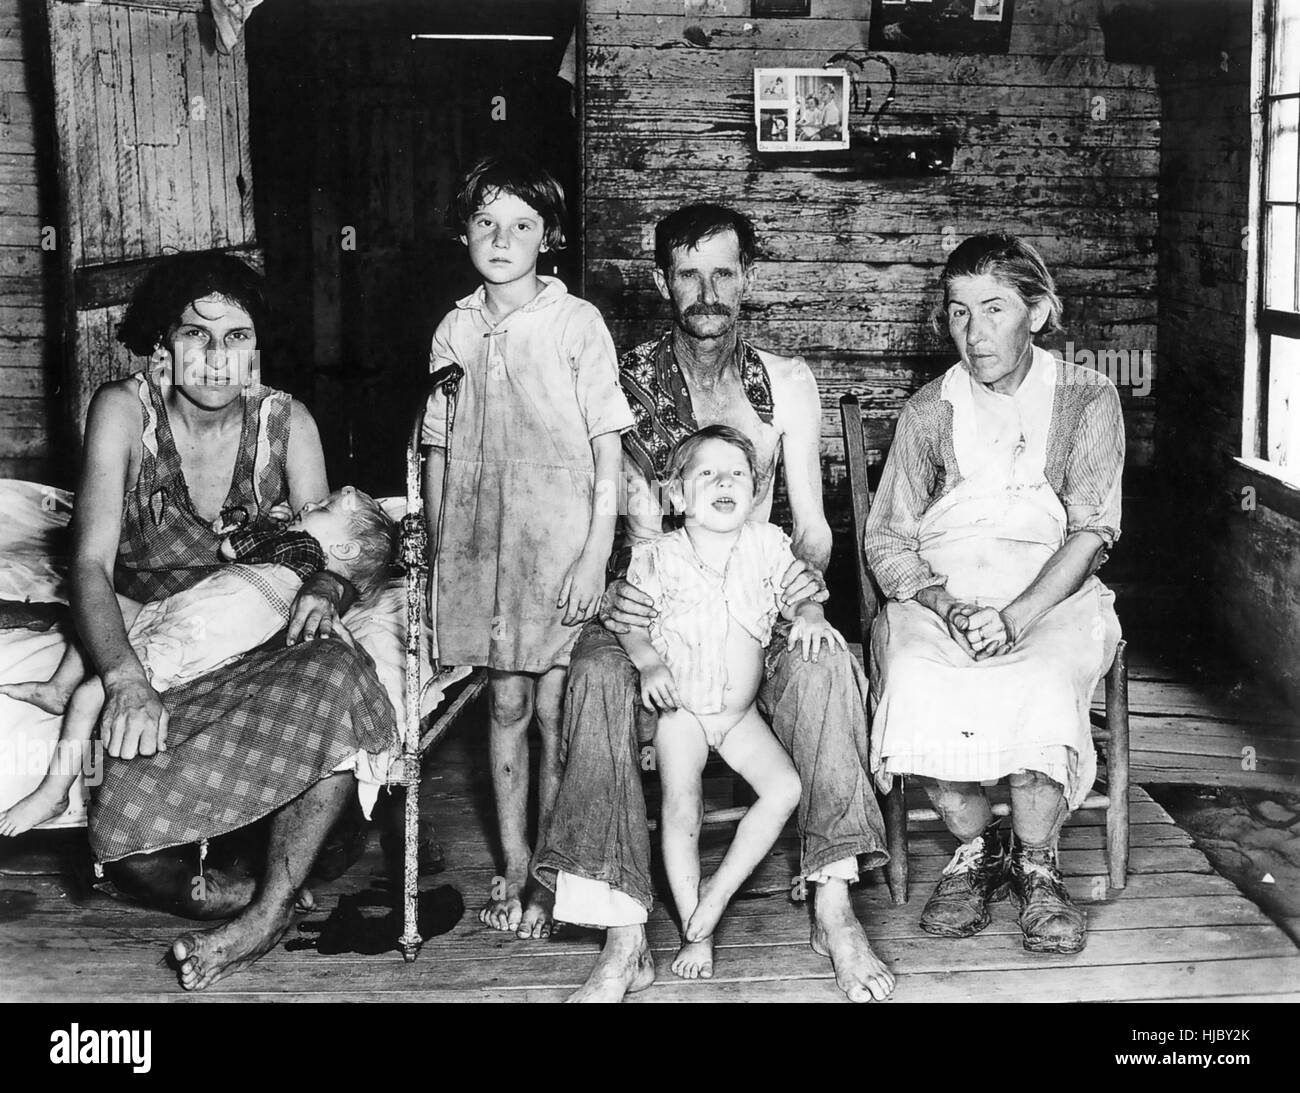 WALKER EVANS (1903-1975) American photographer for the Farm Security Administration (FSA). His photo of 'Bud Fields and his family at Home' in Hale County, Alabama, in 1936. The family were share croppers. Mr Fields wears a scarf to hide his skin cancer. Stock Photo